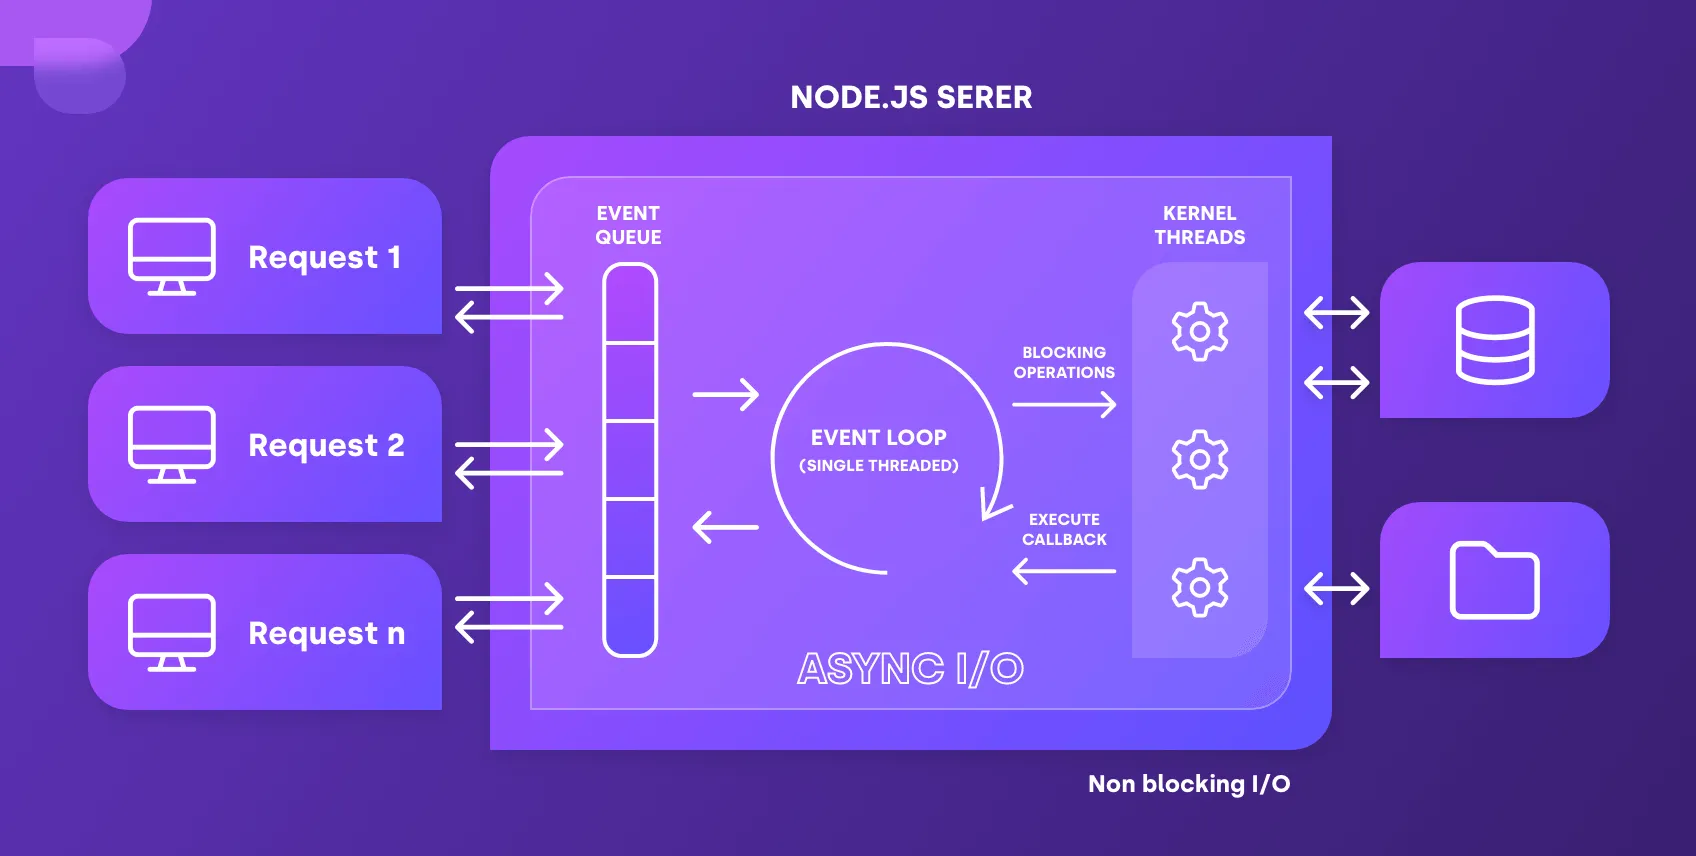 Node.Js At Scale Tips For Building And Maintaining Large Node.Js Applications IA 2 WEB